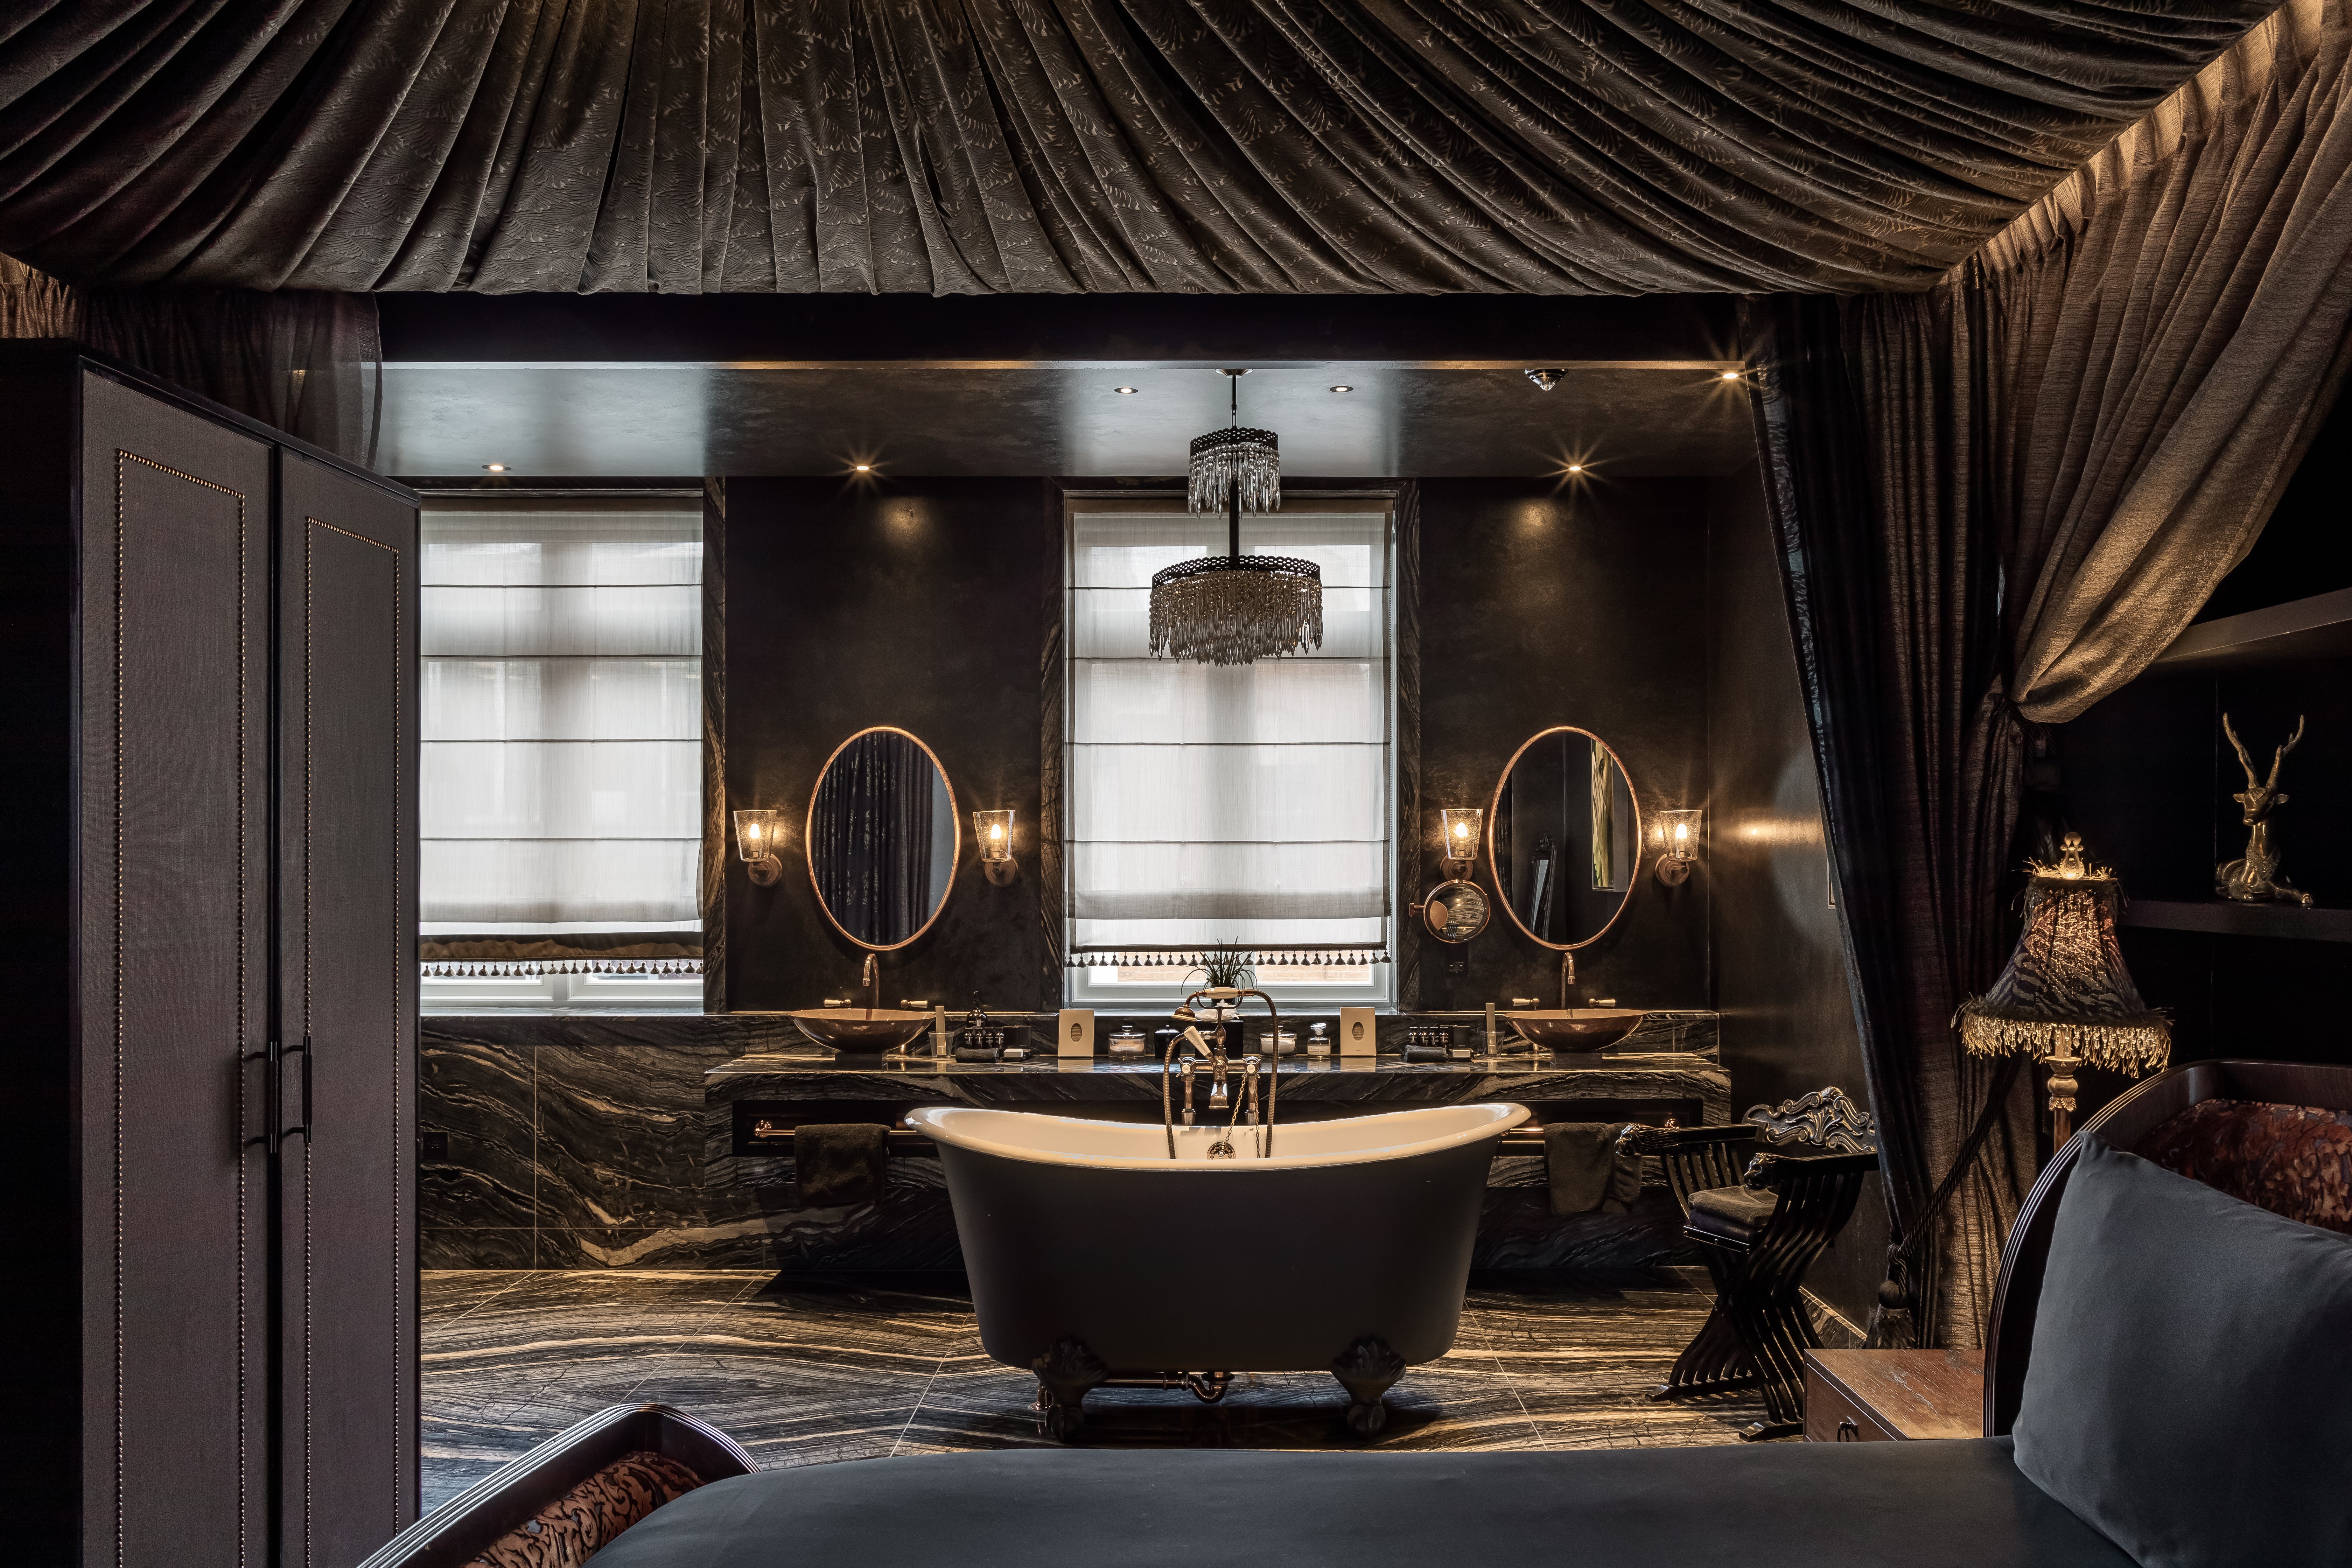 The Mandrake Suite’s sultry claw-foot tub